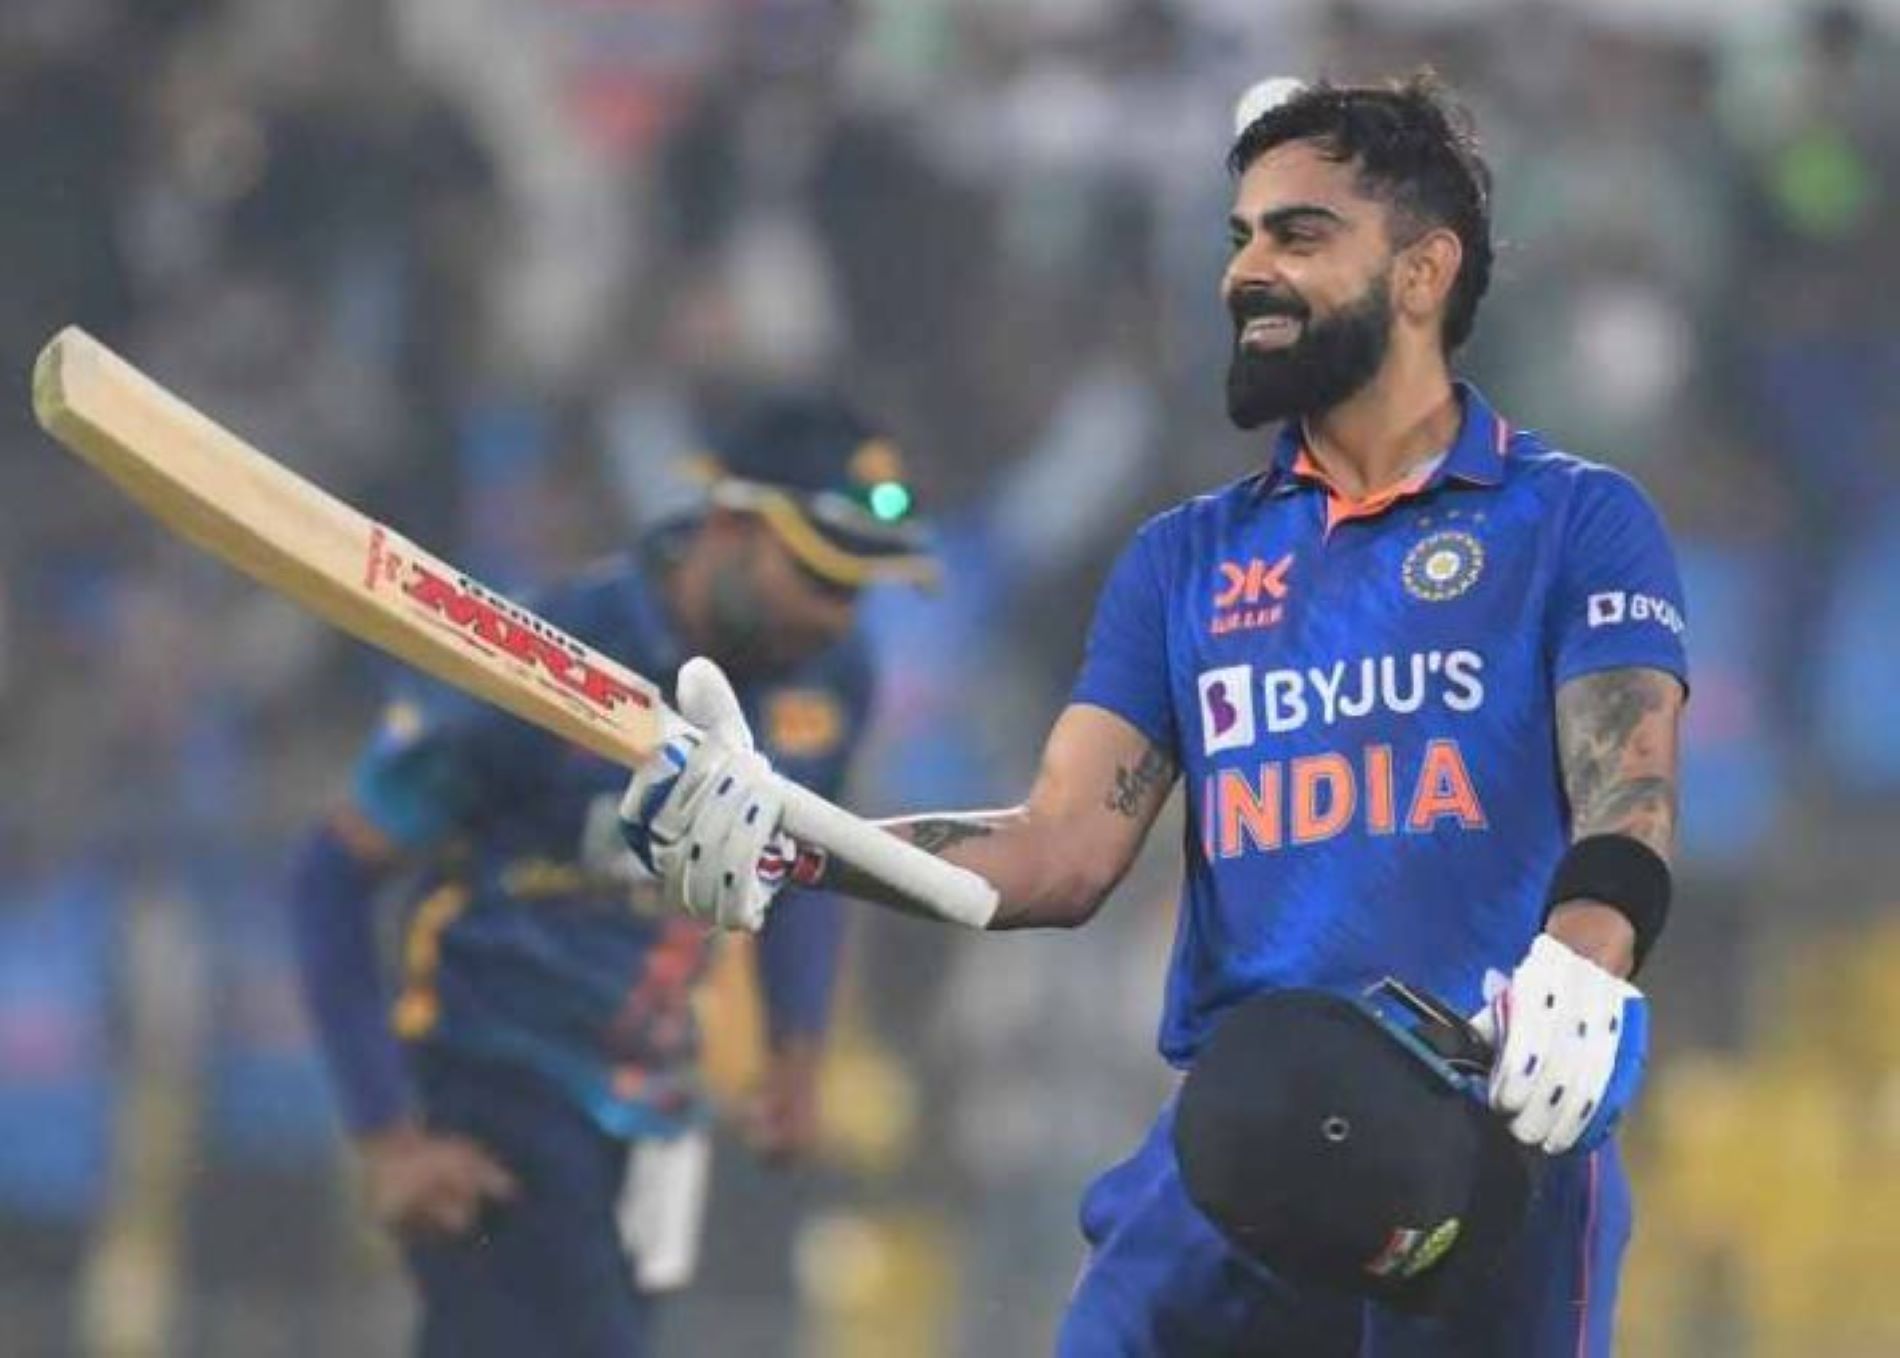 Kohli has scored two centuries in the 2023 World Cup.